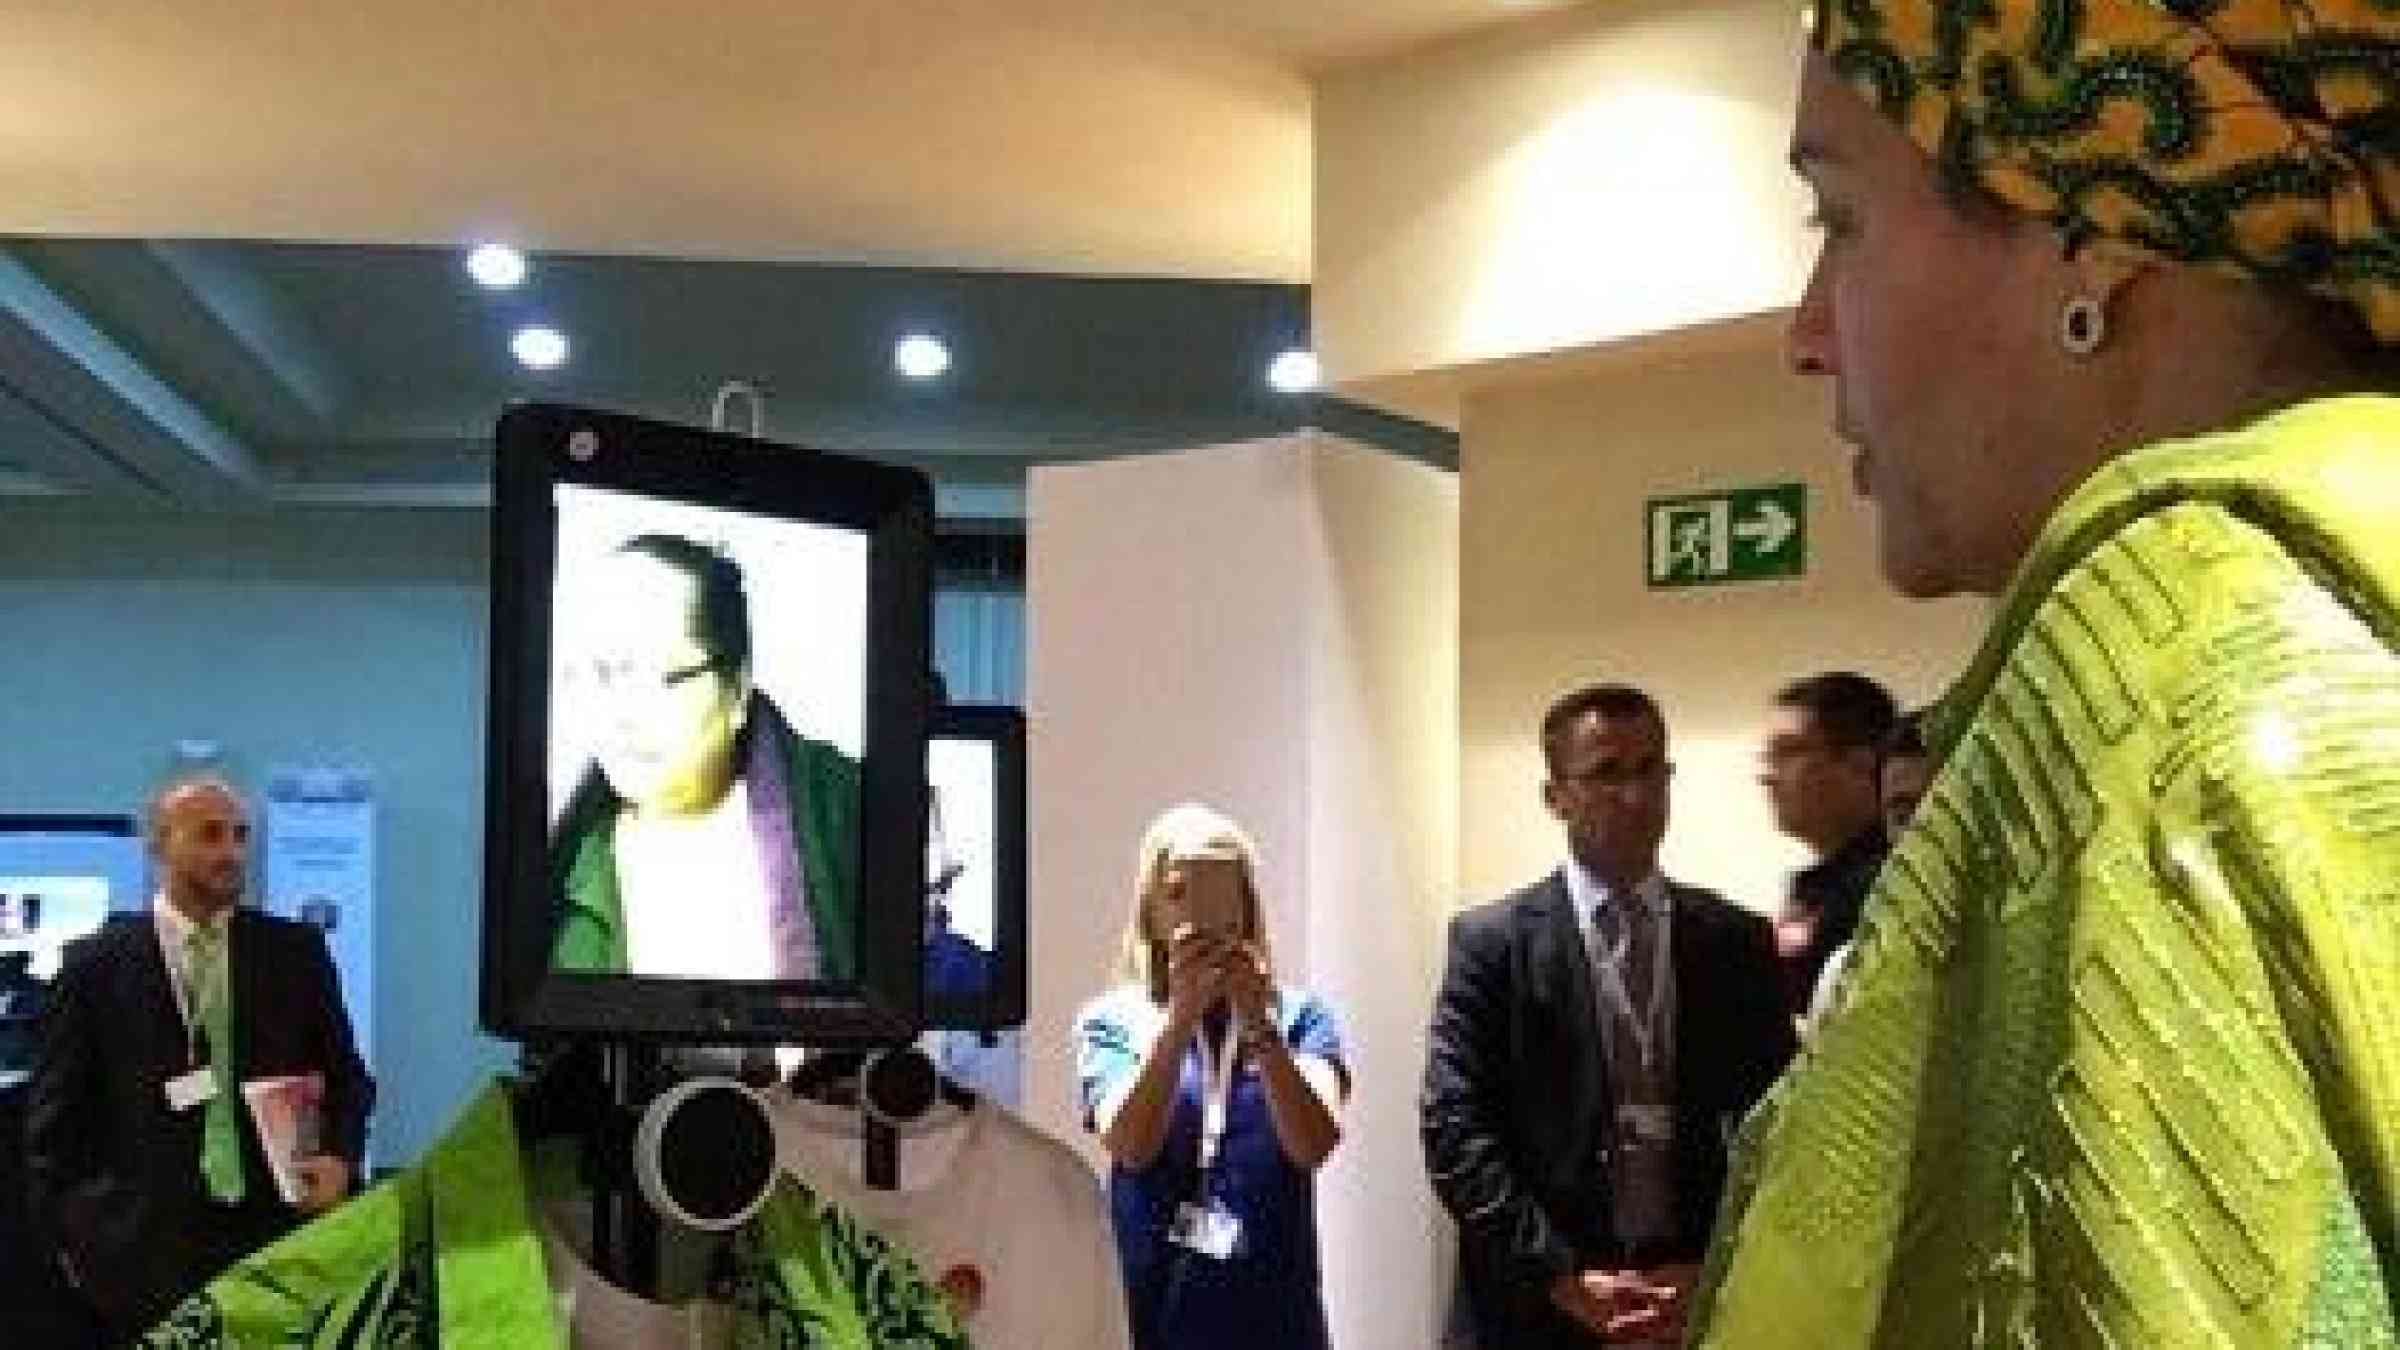 UN Deputy Secretary-General Amina Mohammed interacts with Lanieta Tuimabu, a board member of the Pacific Disability Forum, thousands of kilometres away thanks to the telepresence robot. (Photo: Catherine Naughton)